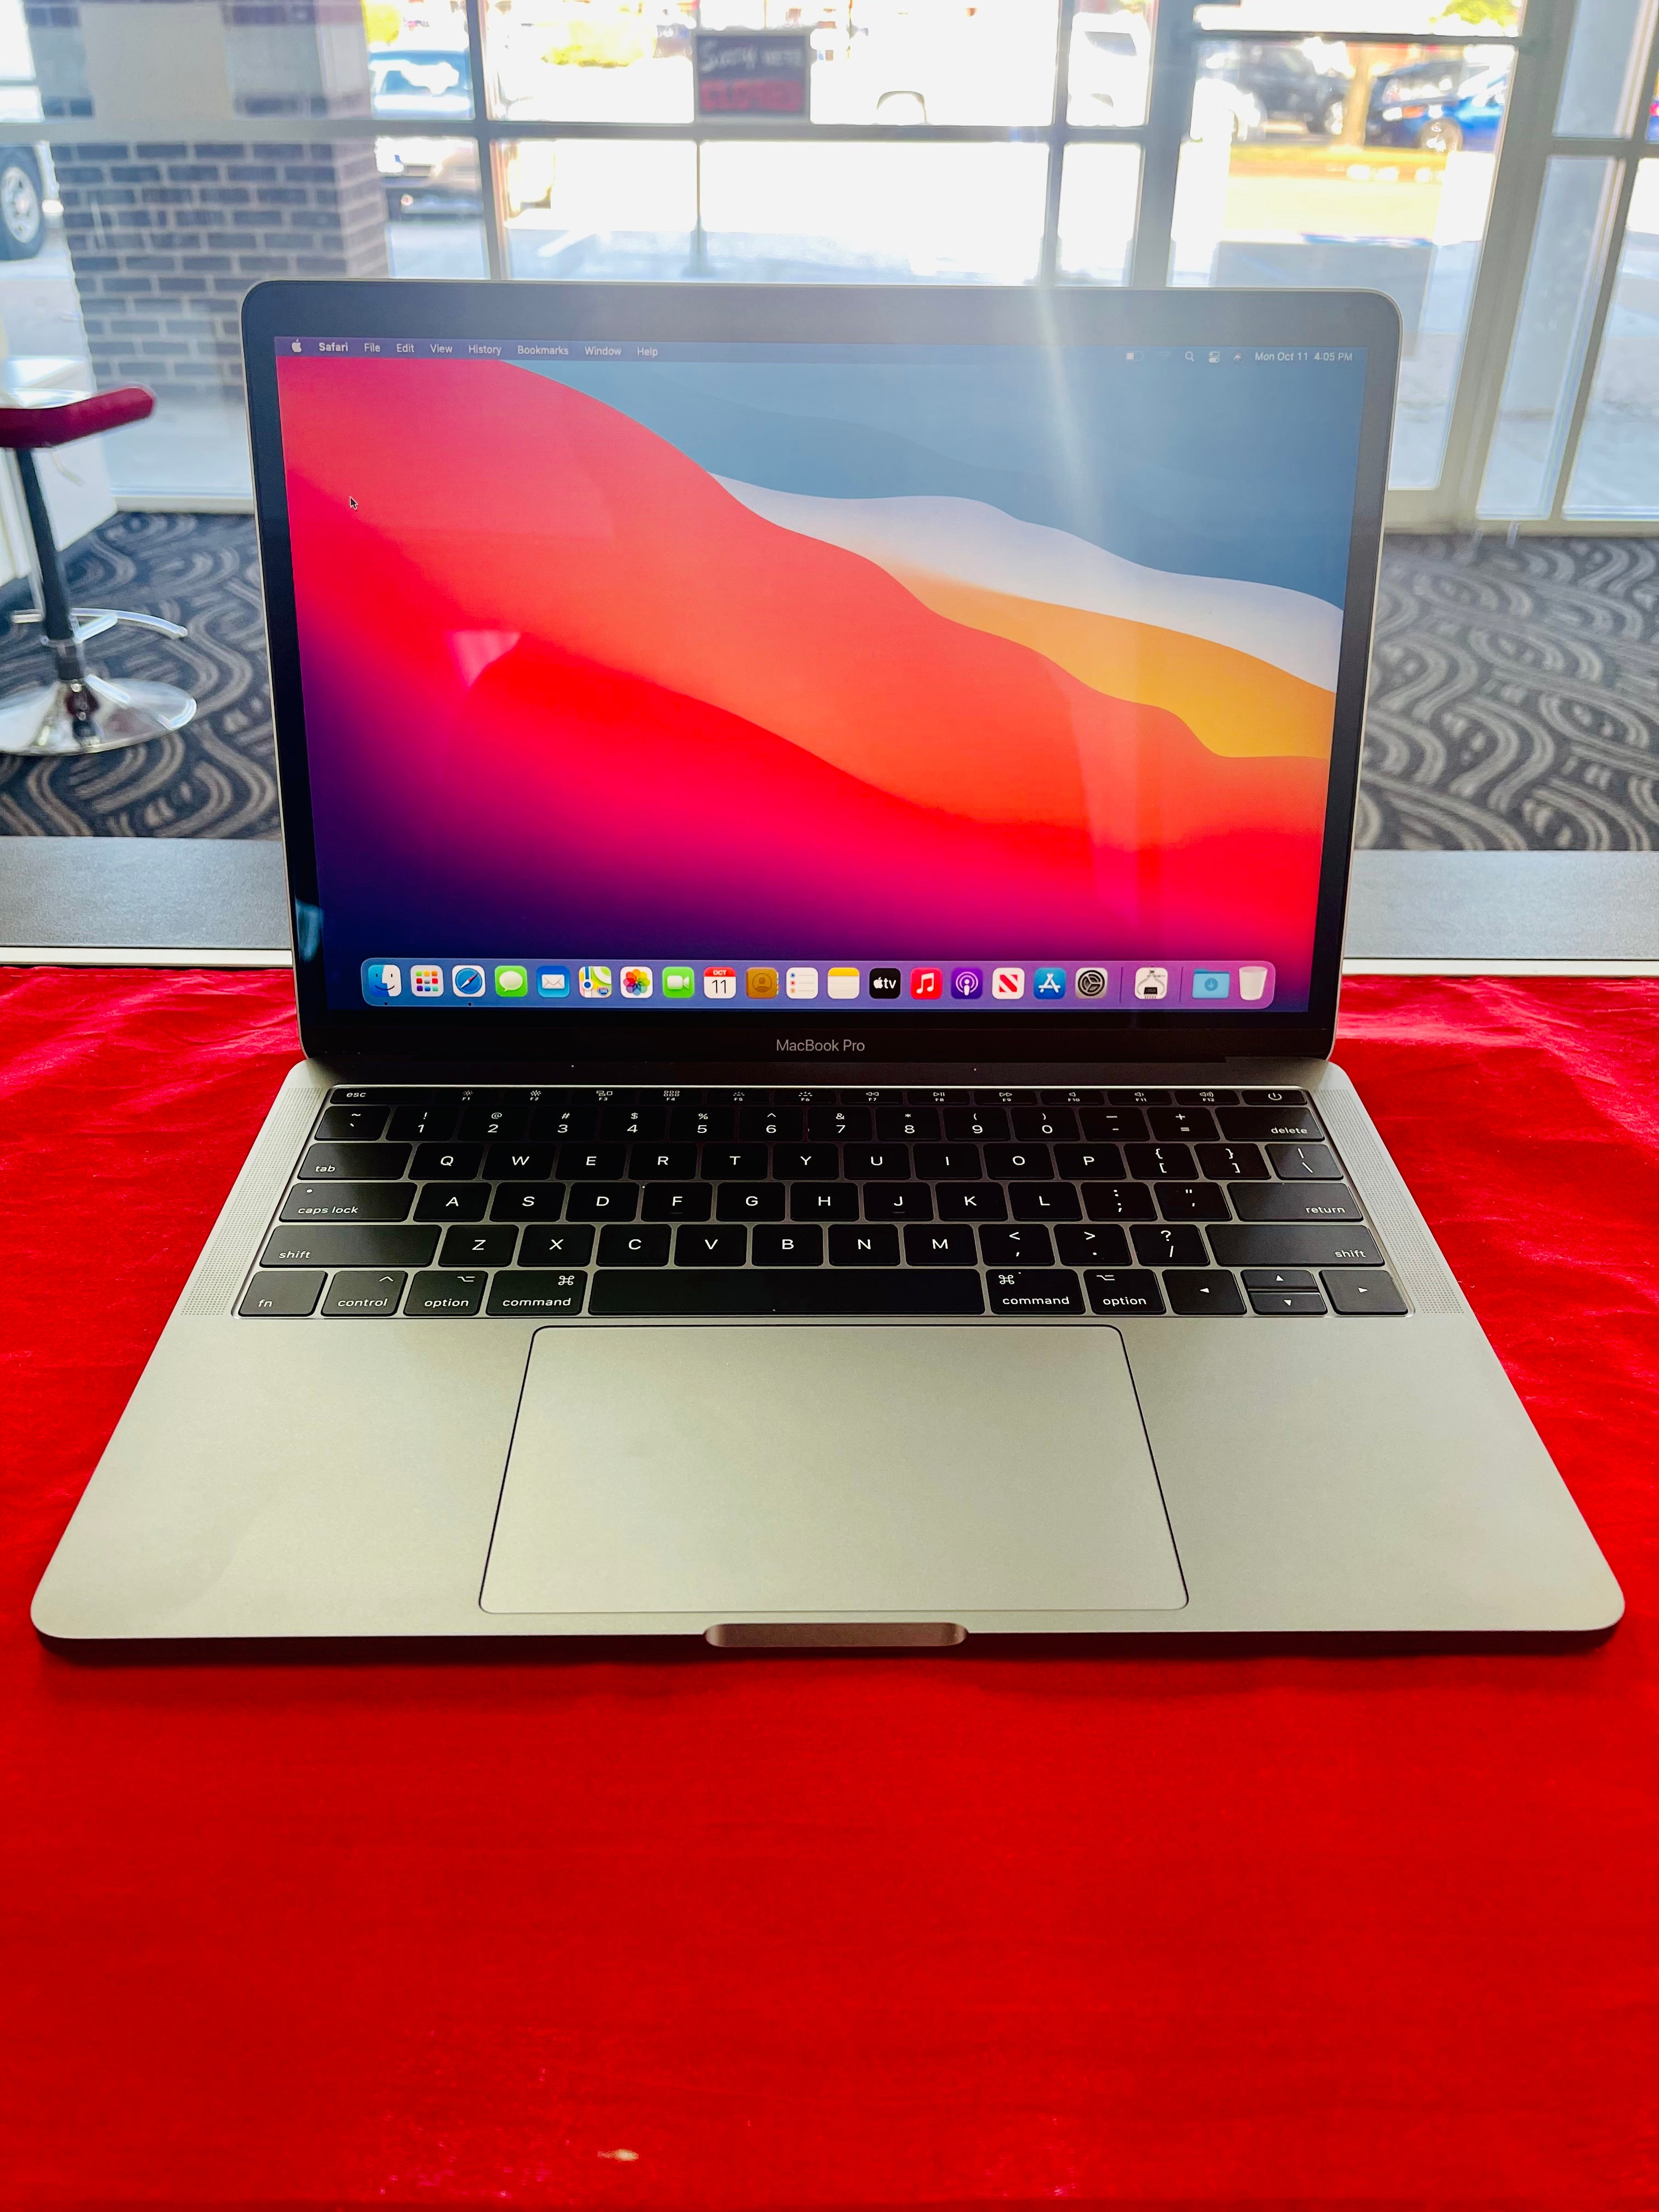 The New Macbook with M1 Pro Chip, Newly Redesigned with a new hefty price tag! Will you buy the new Macbook?